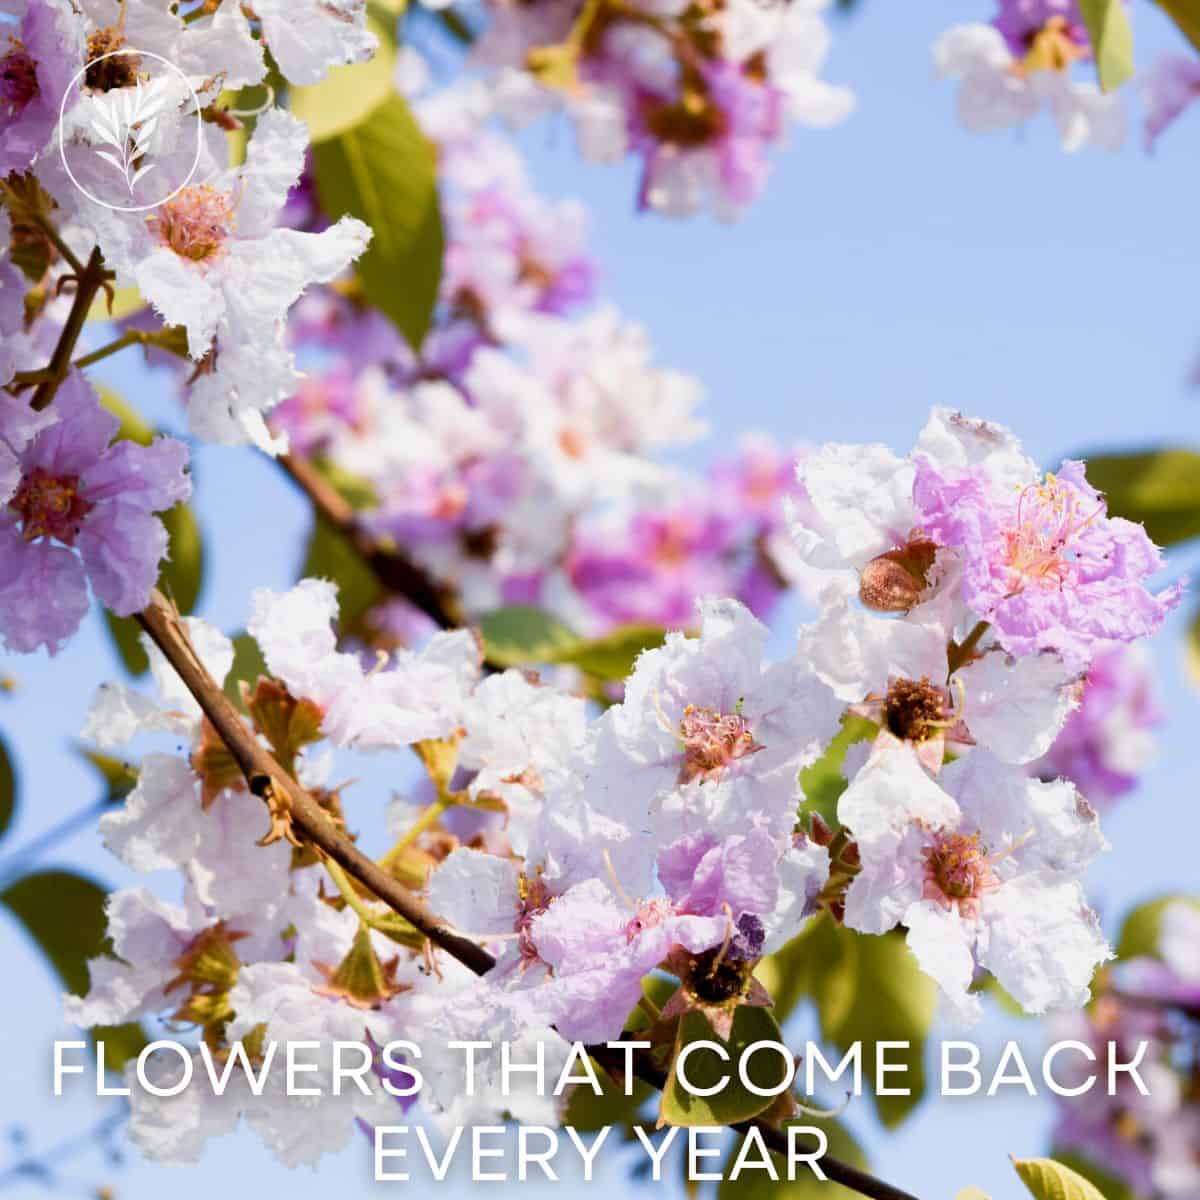 Flowers that come back every year via @home4theharvest